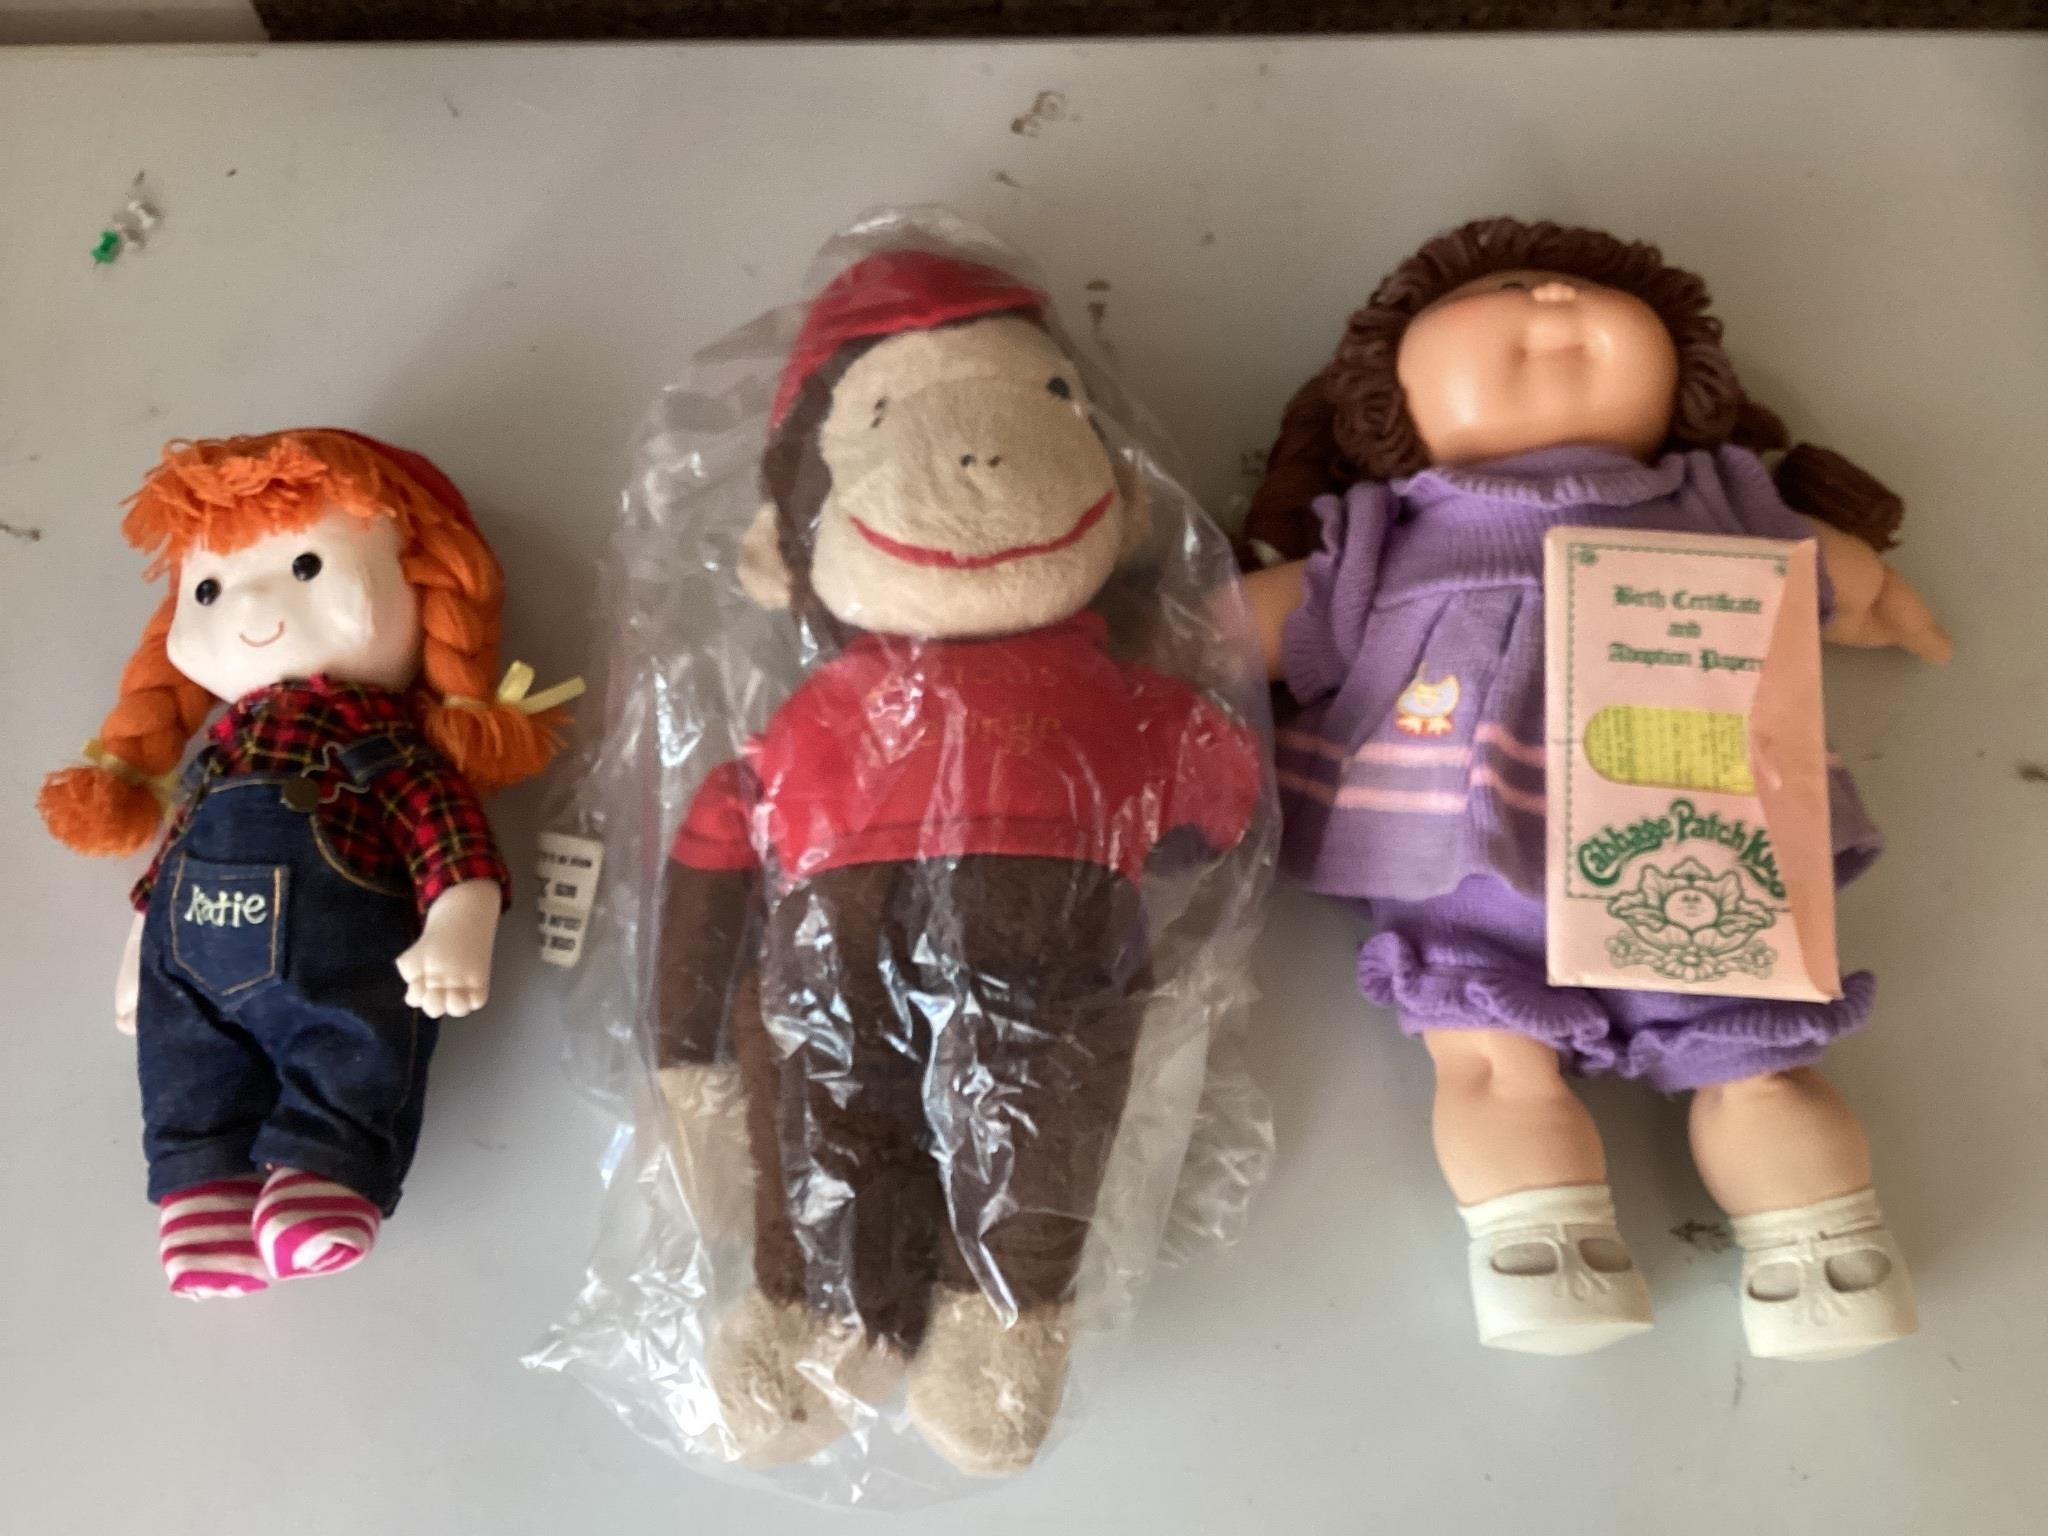 Cabbage patch, curious George and Katy doll